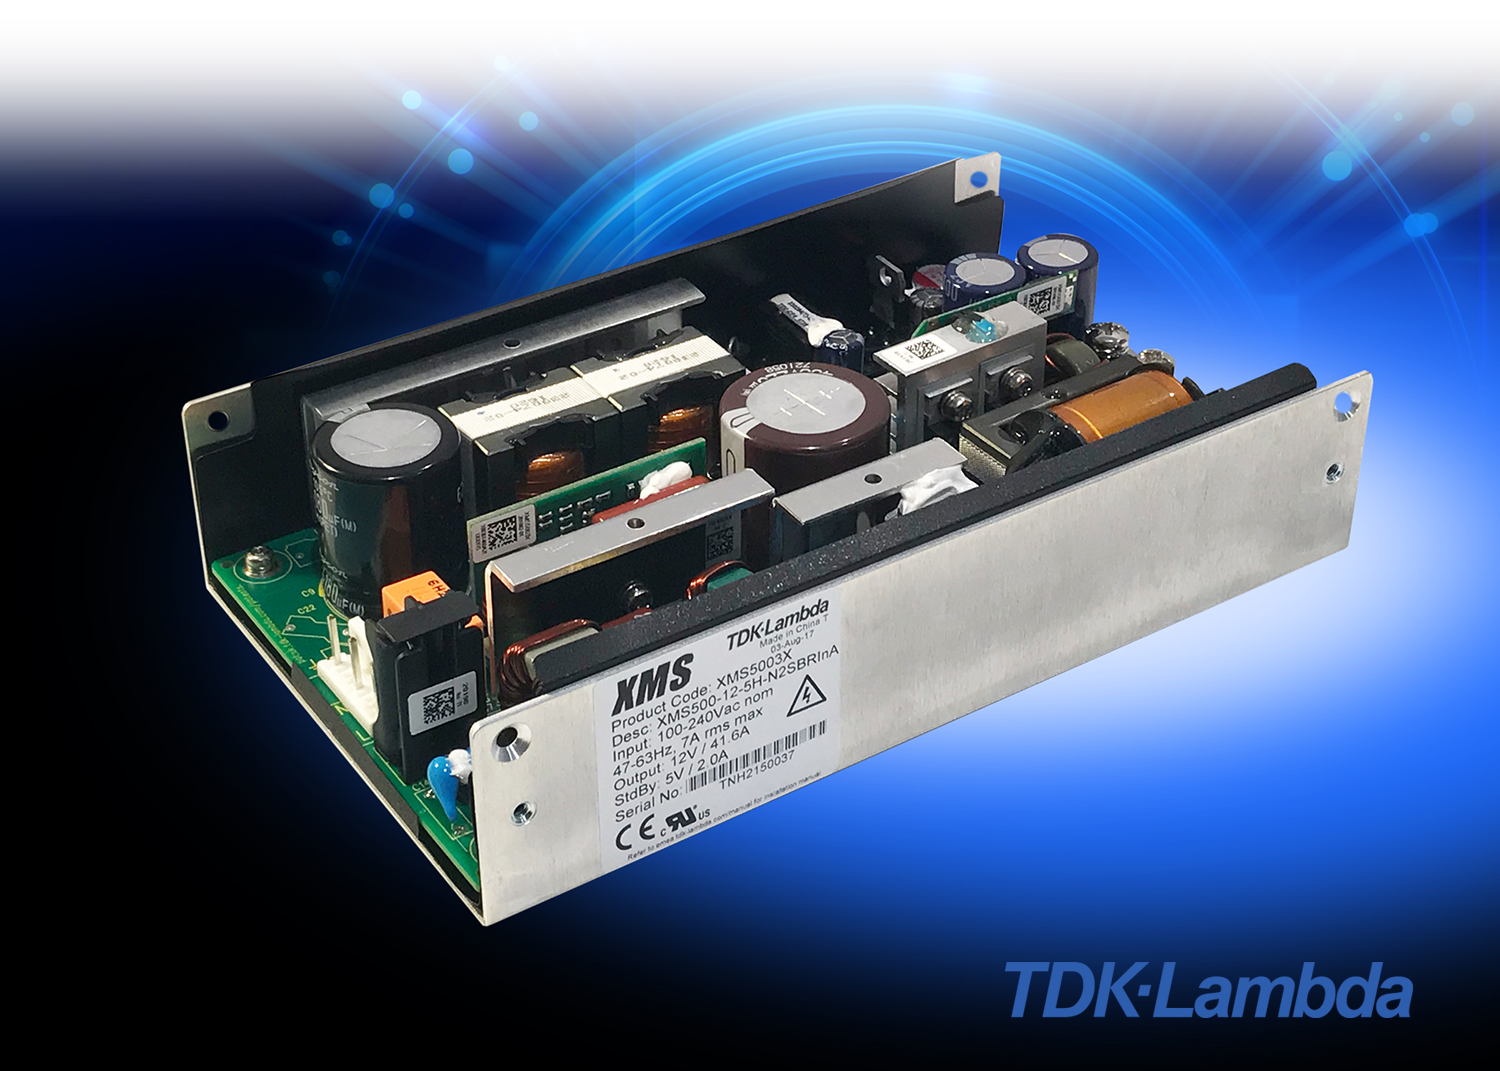 Configurable 500 W power supplies have low airflow requirement and meet curve B EMI